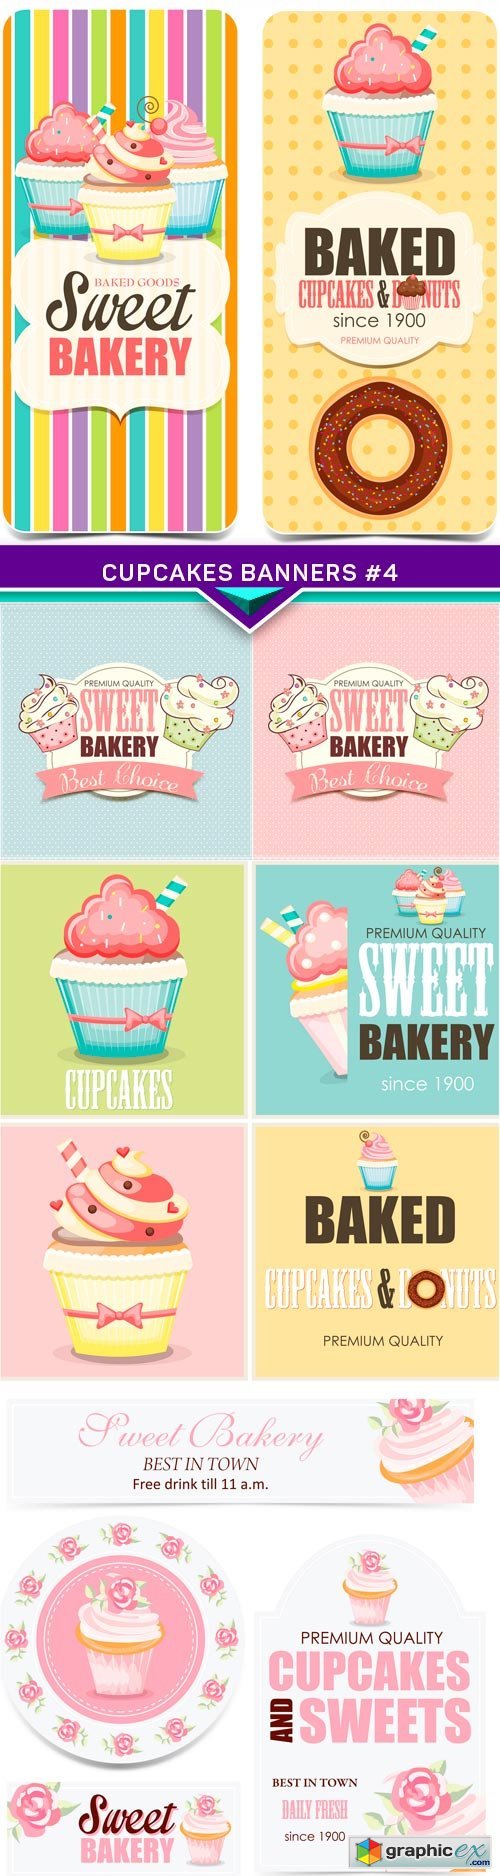 Cupcakes banners #4 5X EPS